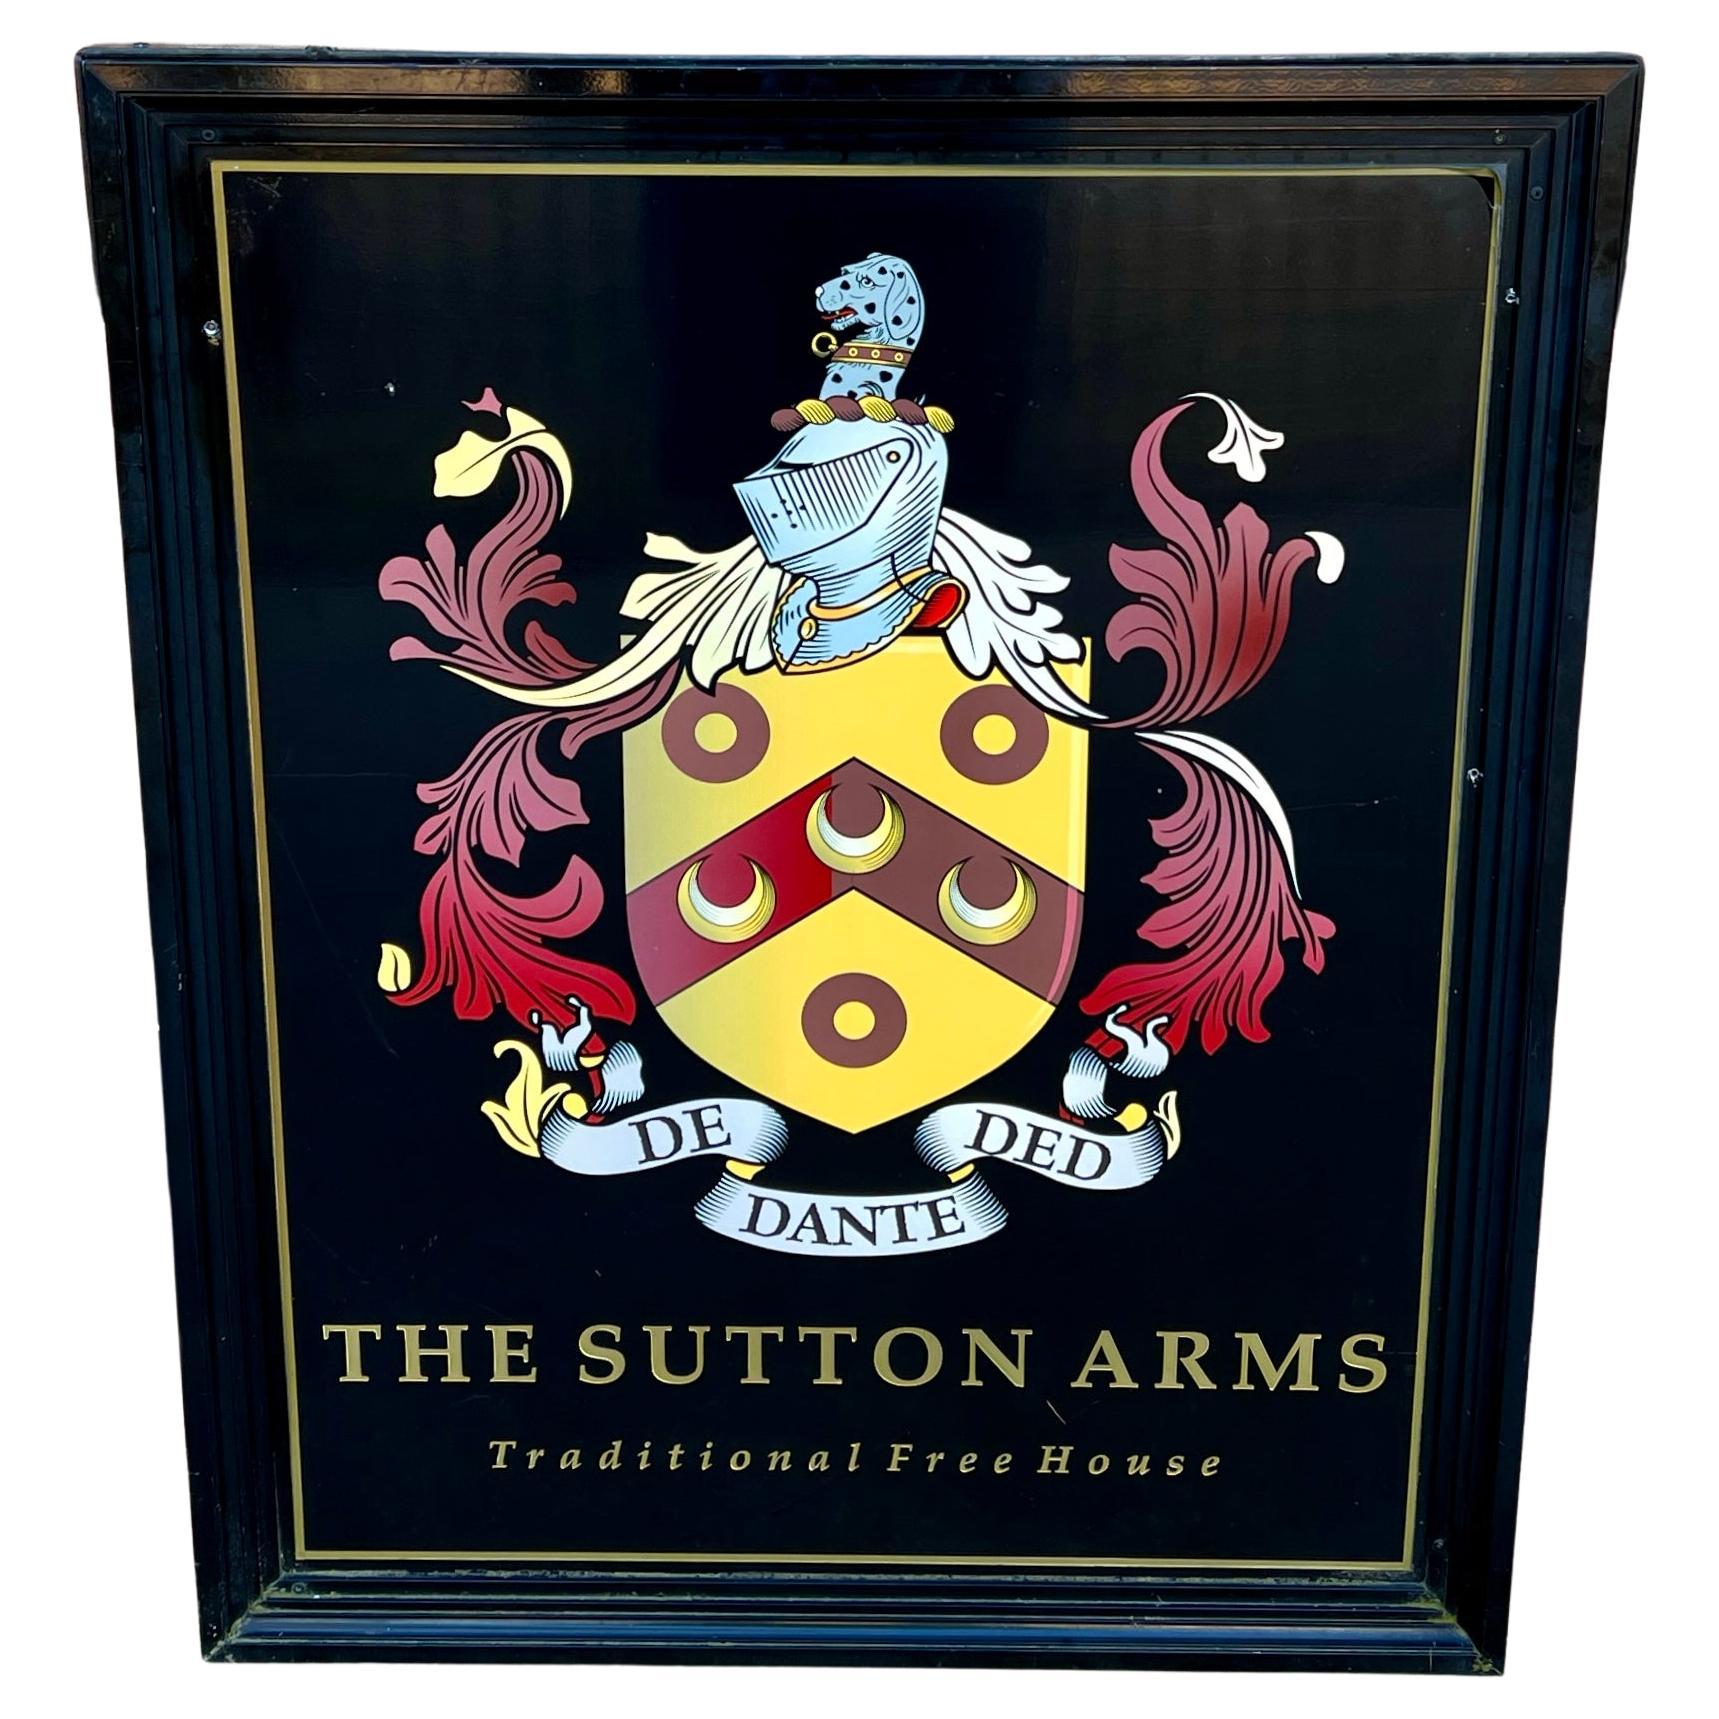 Vintage English Pub Sign Metal Double Sided Sutton Arms Traditional Free House For Sale